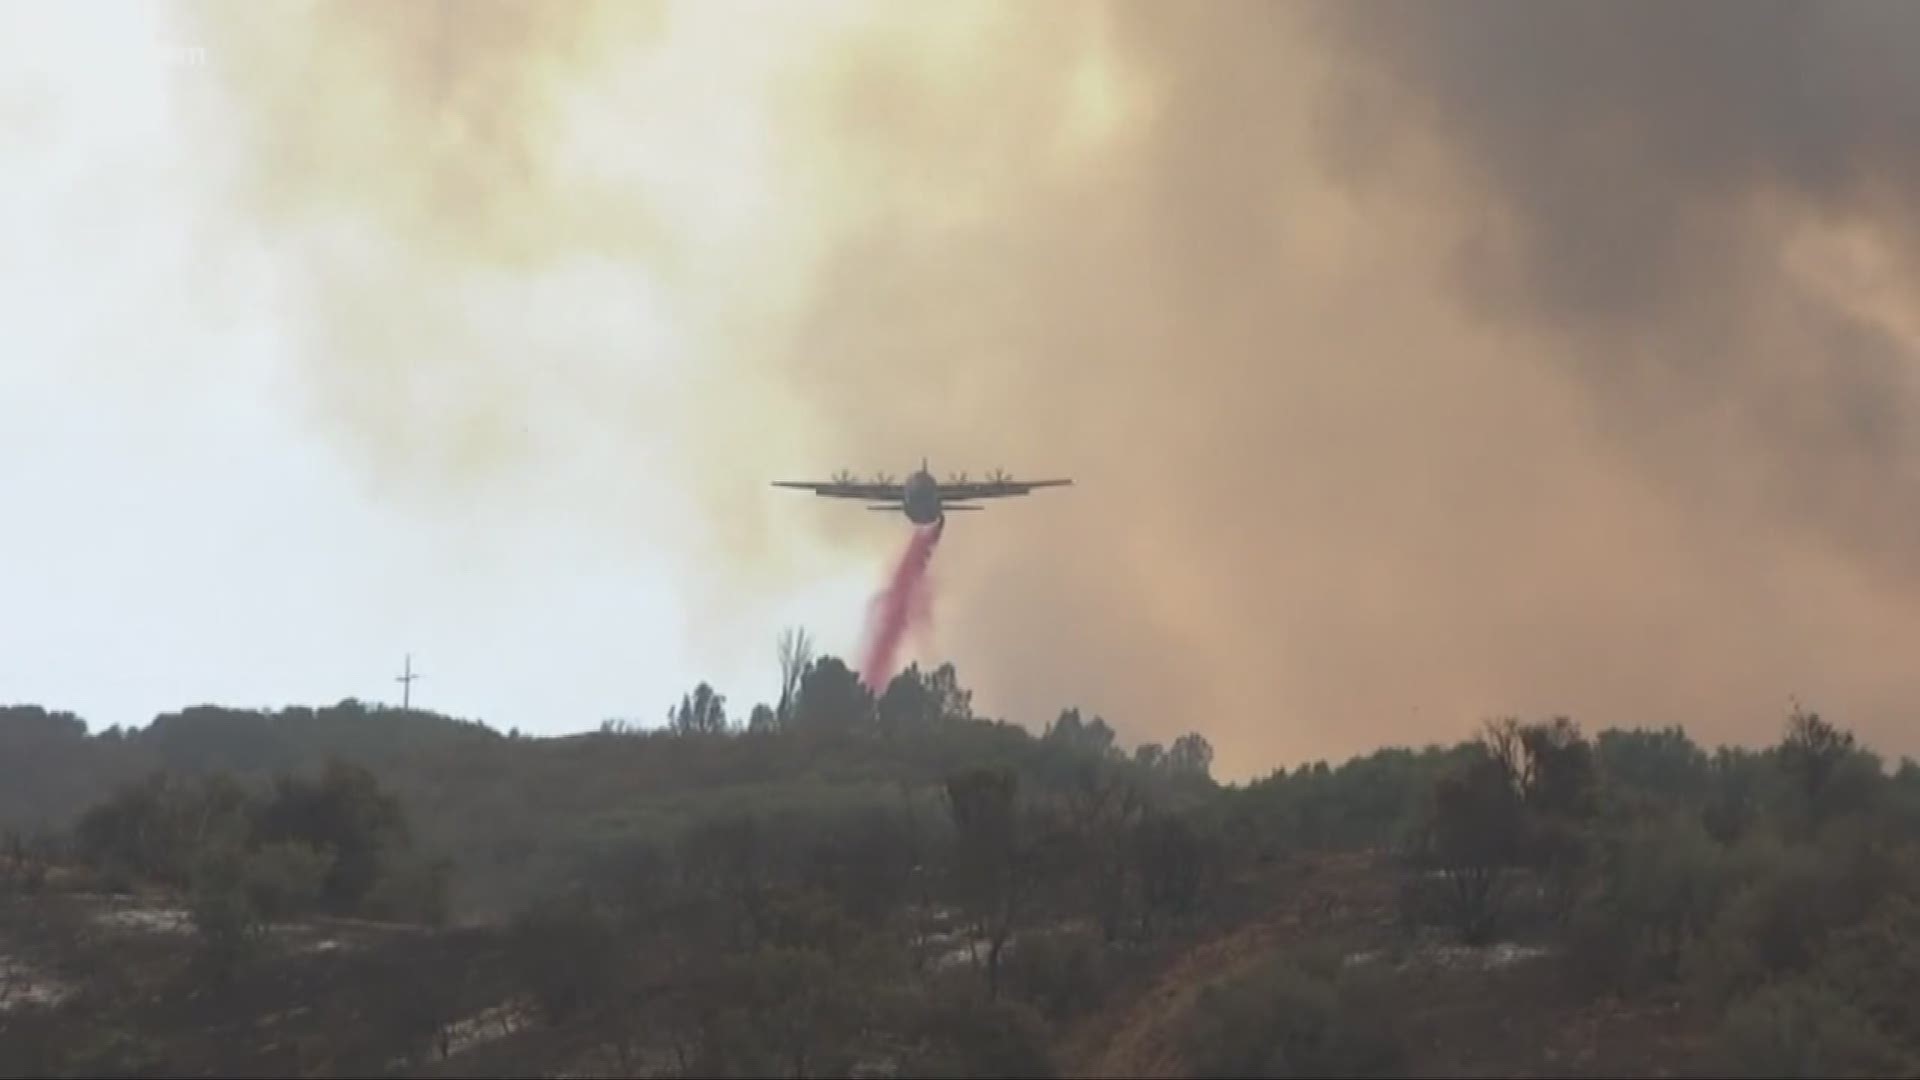 More people are being evacuated from their homes in parts of Mendocino and Lake counties as firefighters continue to battle the massive Mendocino Complex Fire.